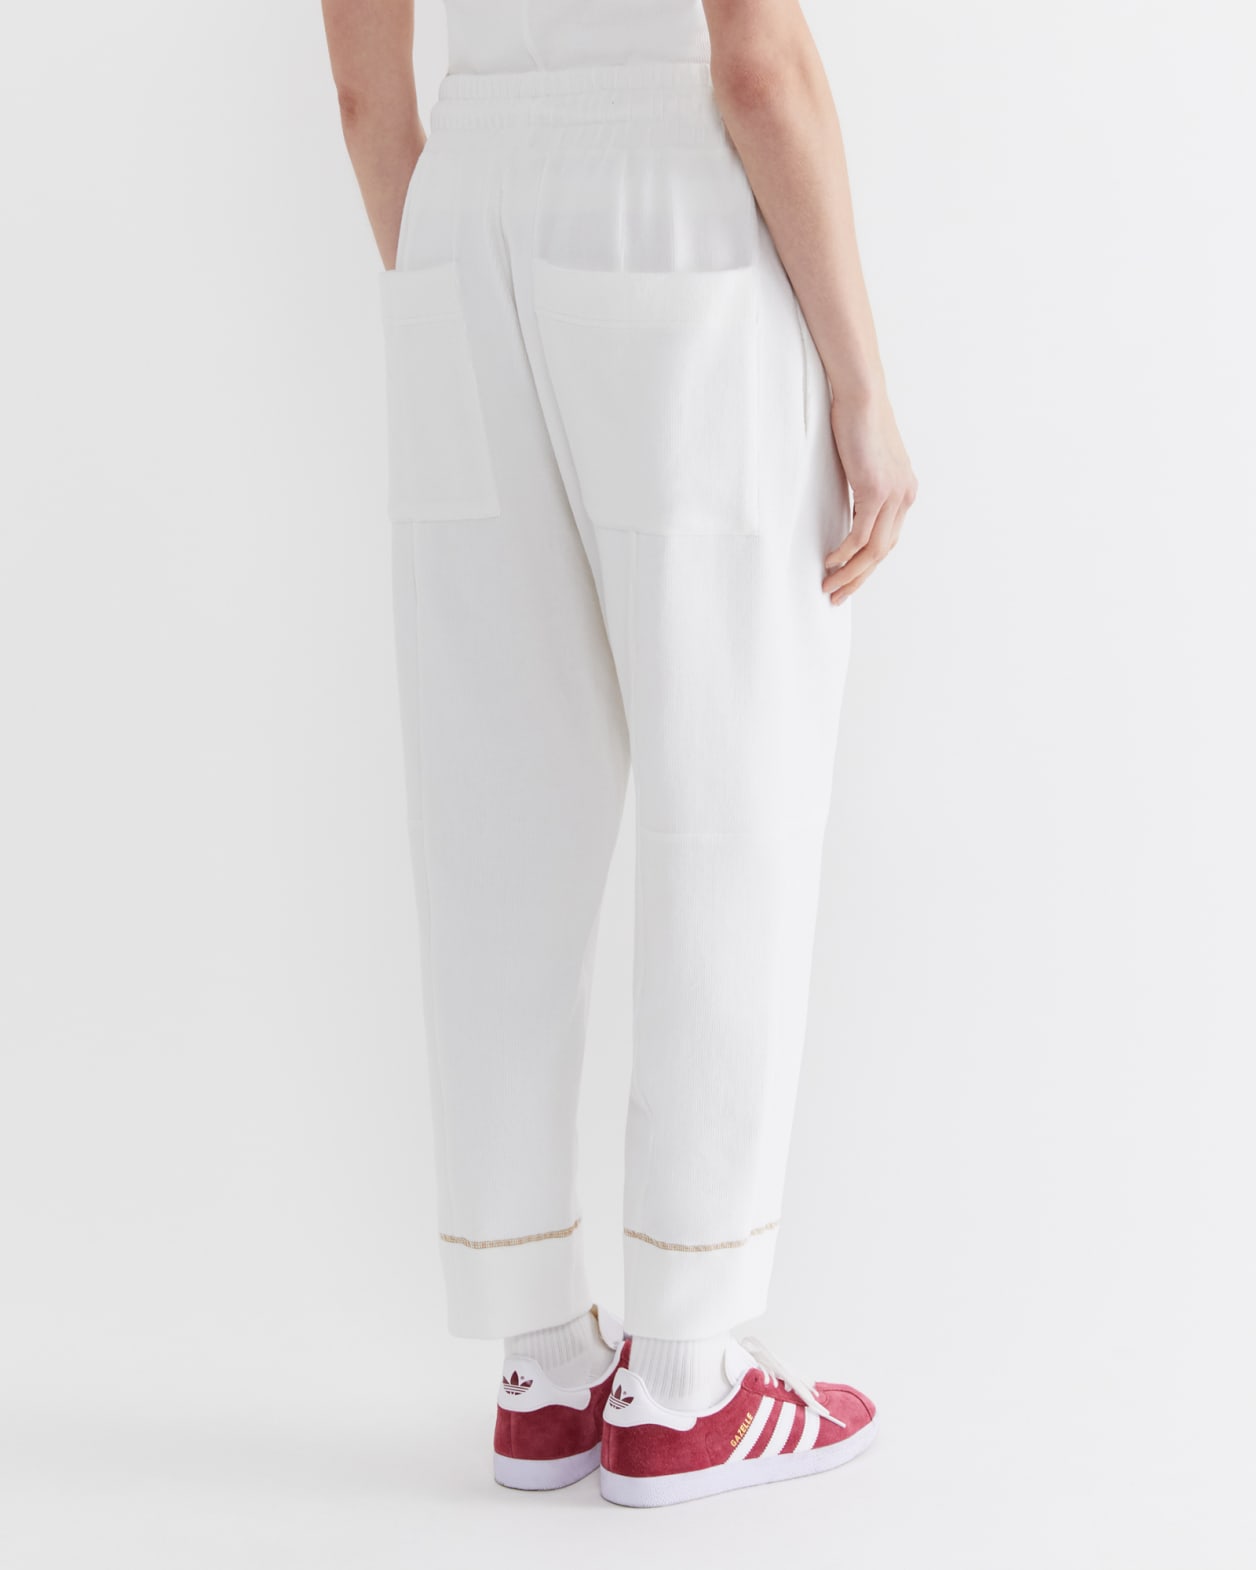 Alyse Cord Pull On Pant in OFF WHITE